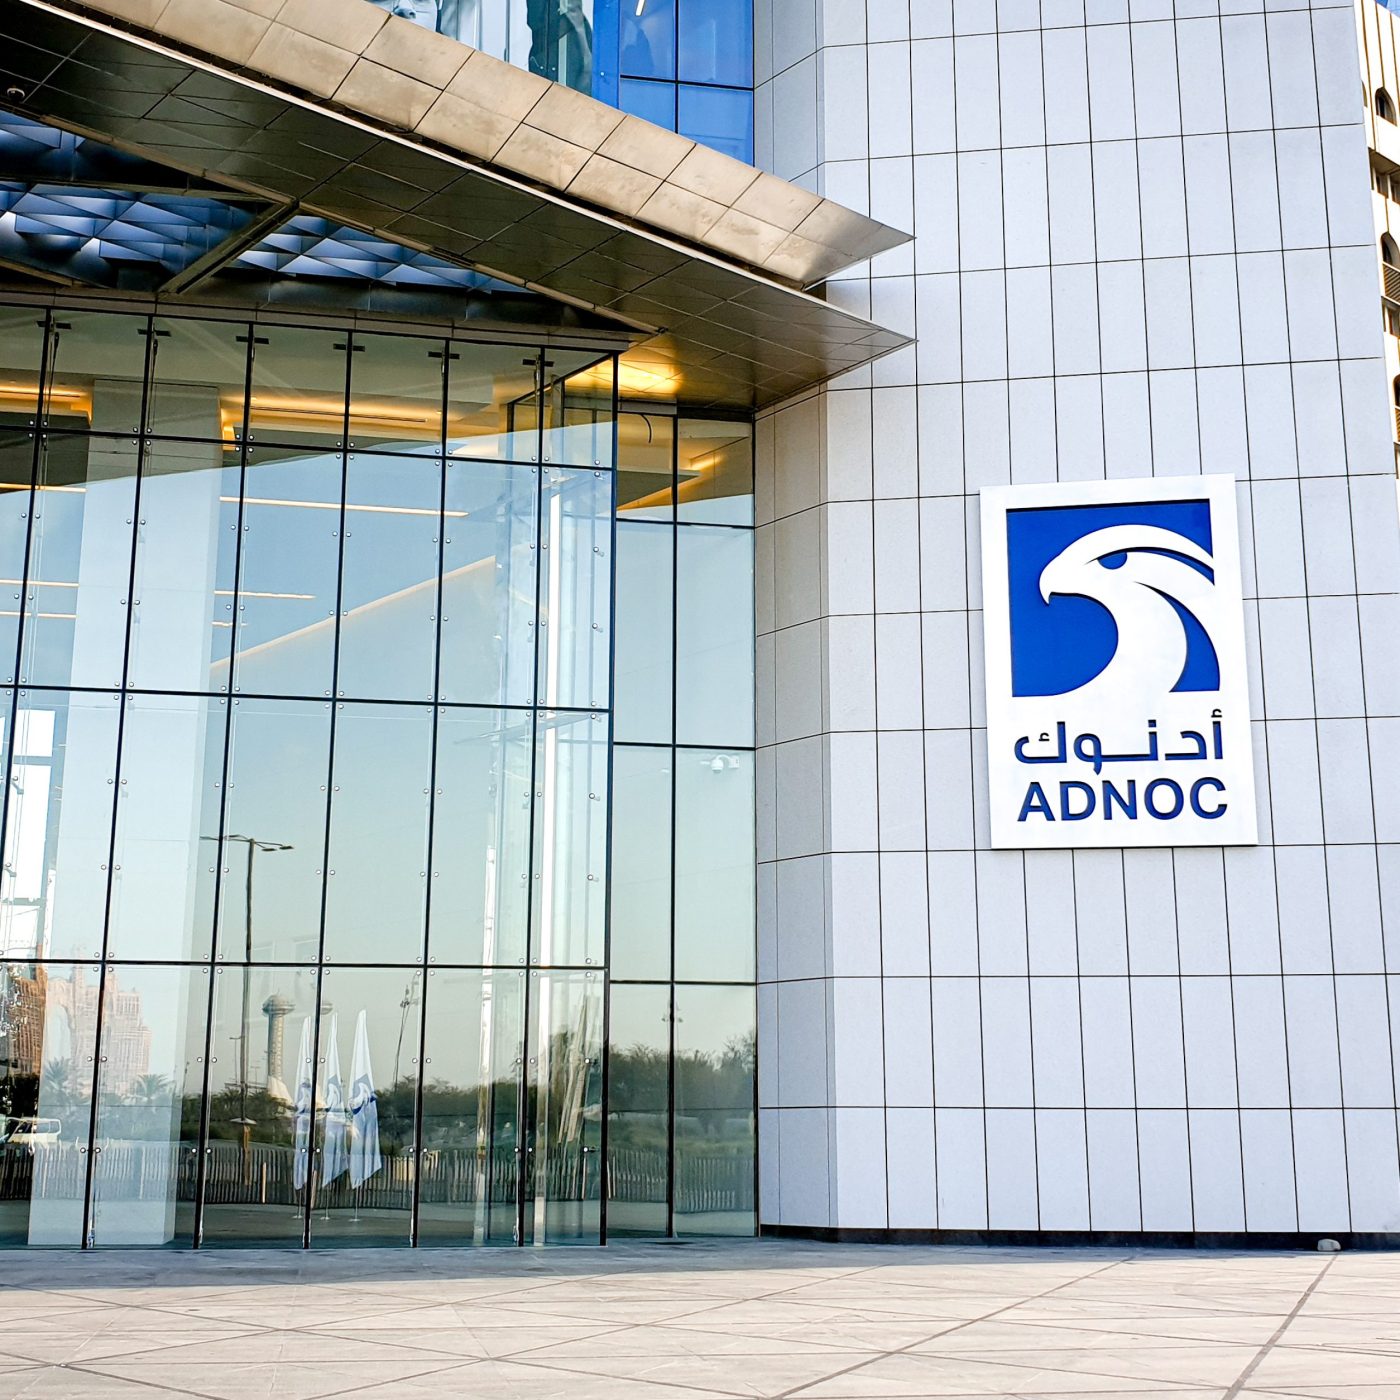 Headquarter in Abu Dhabi. ADNOC is one of the largest oil company